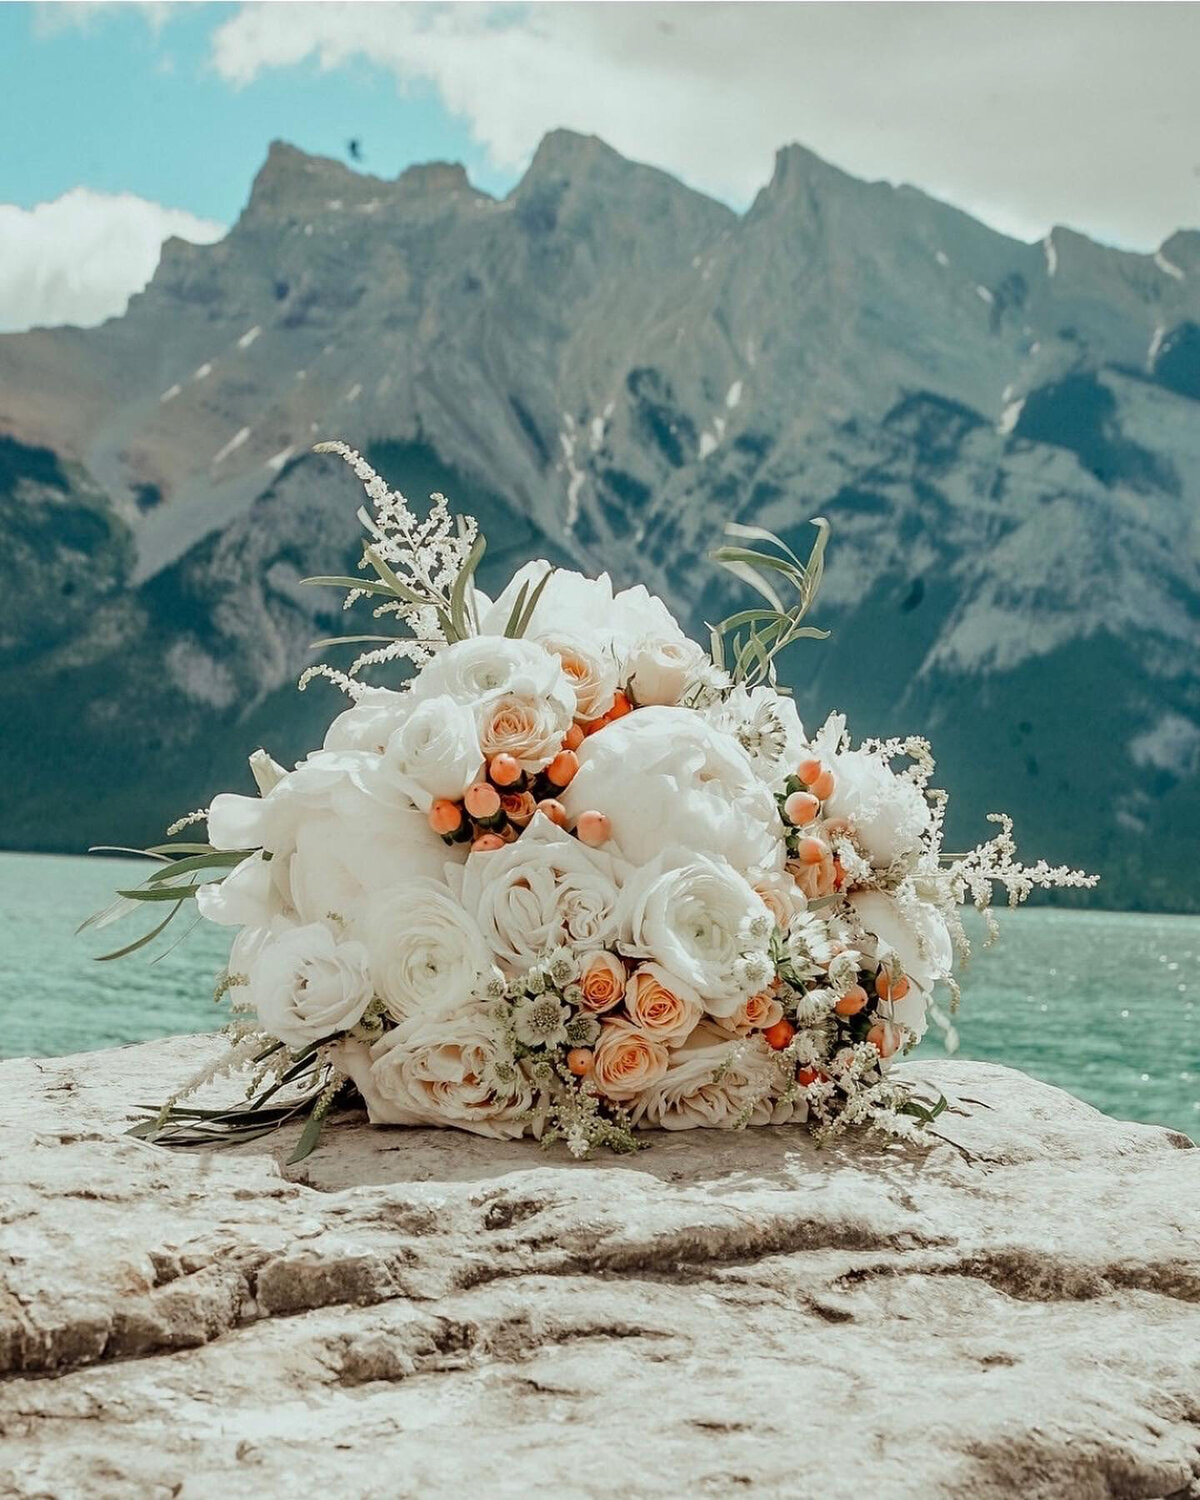 Classic bridal bouquet or white roses and pops of peach by Le Bouquet, Calgary wedding florist, featured on the Brontë Bride Vendor Guide.